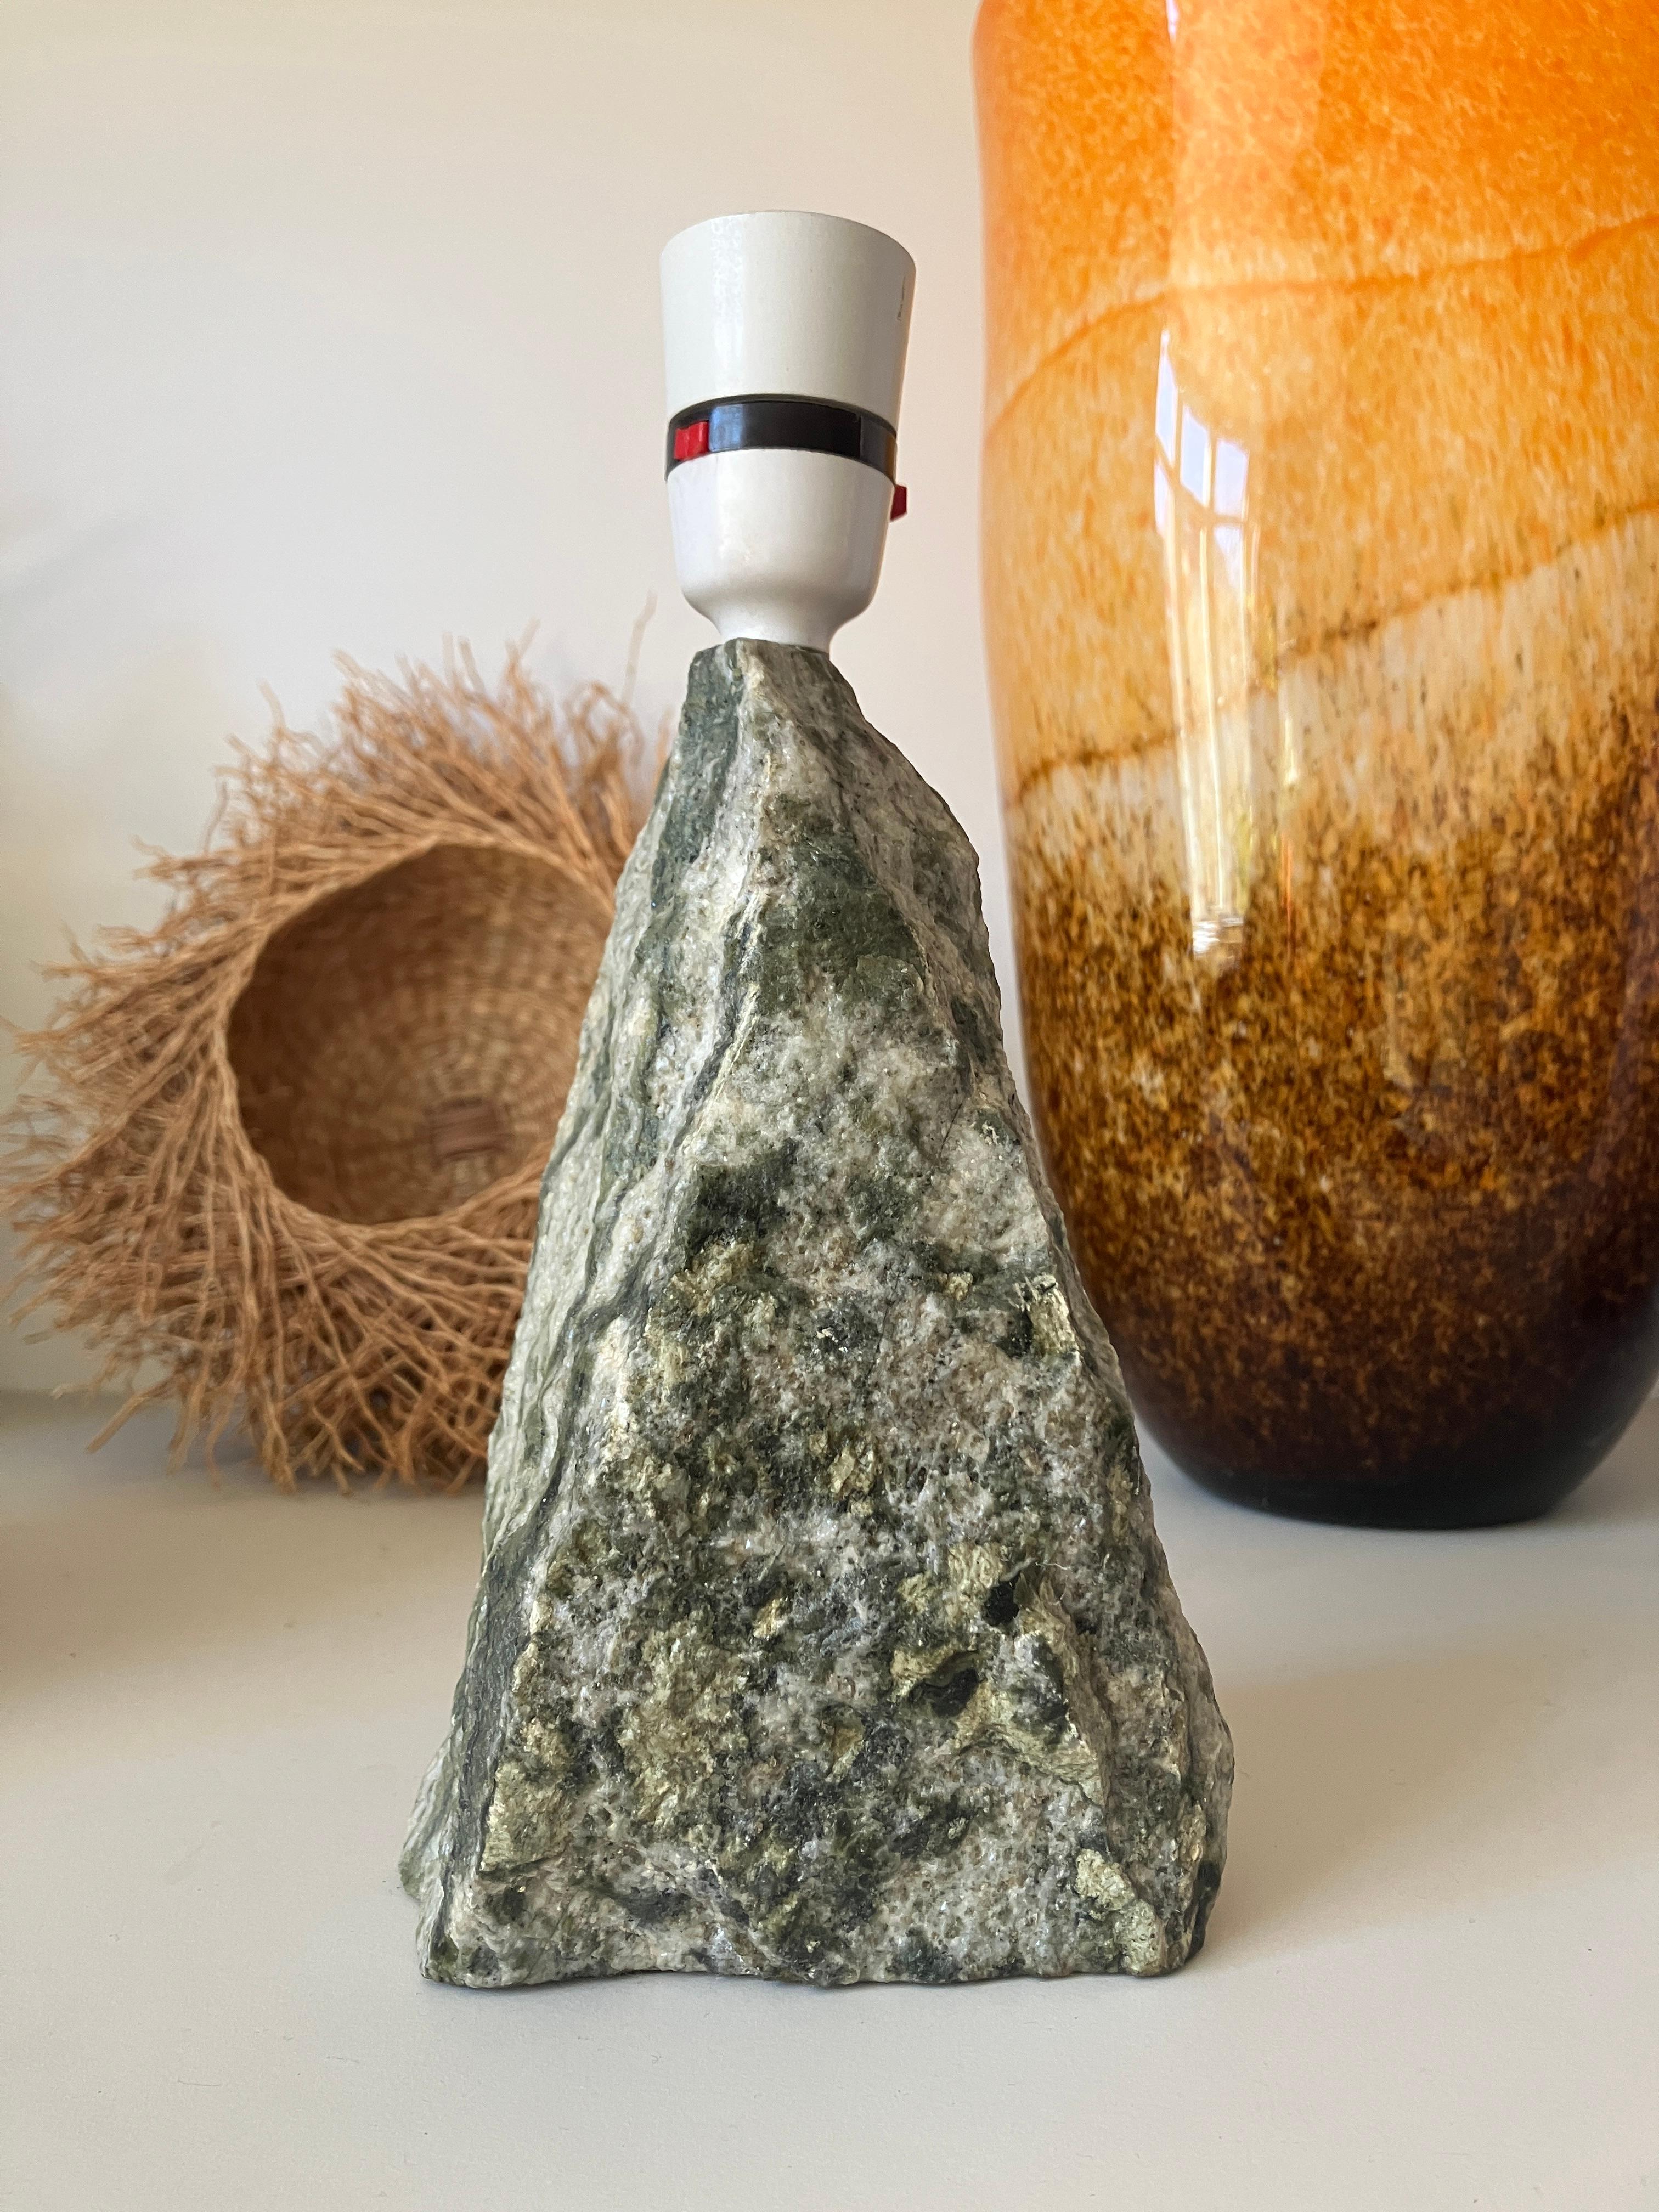 A stunning marble stone lamp base from Scotland. The marble has green-grey hues, specific to Dunkeld in Scotland. Lovely chiseled obelisk shape and a gorgeous rough stone finish. 

This Scottish marble lamp has a leather base and a sticker saying;